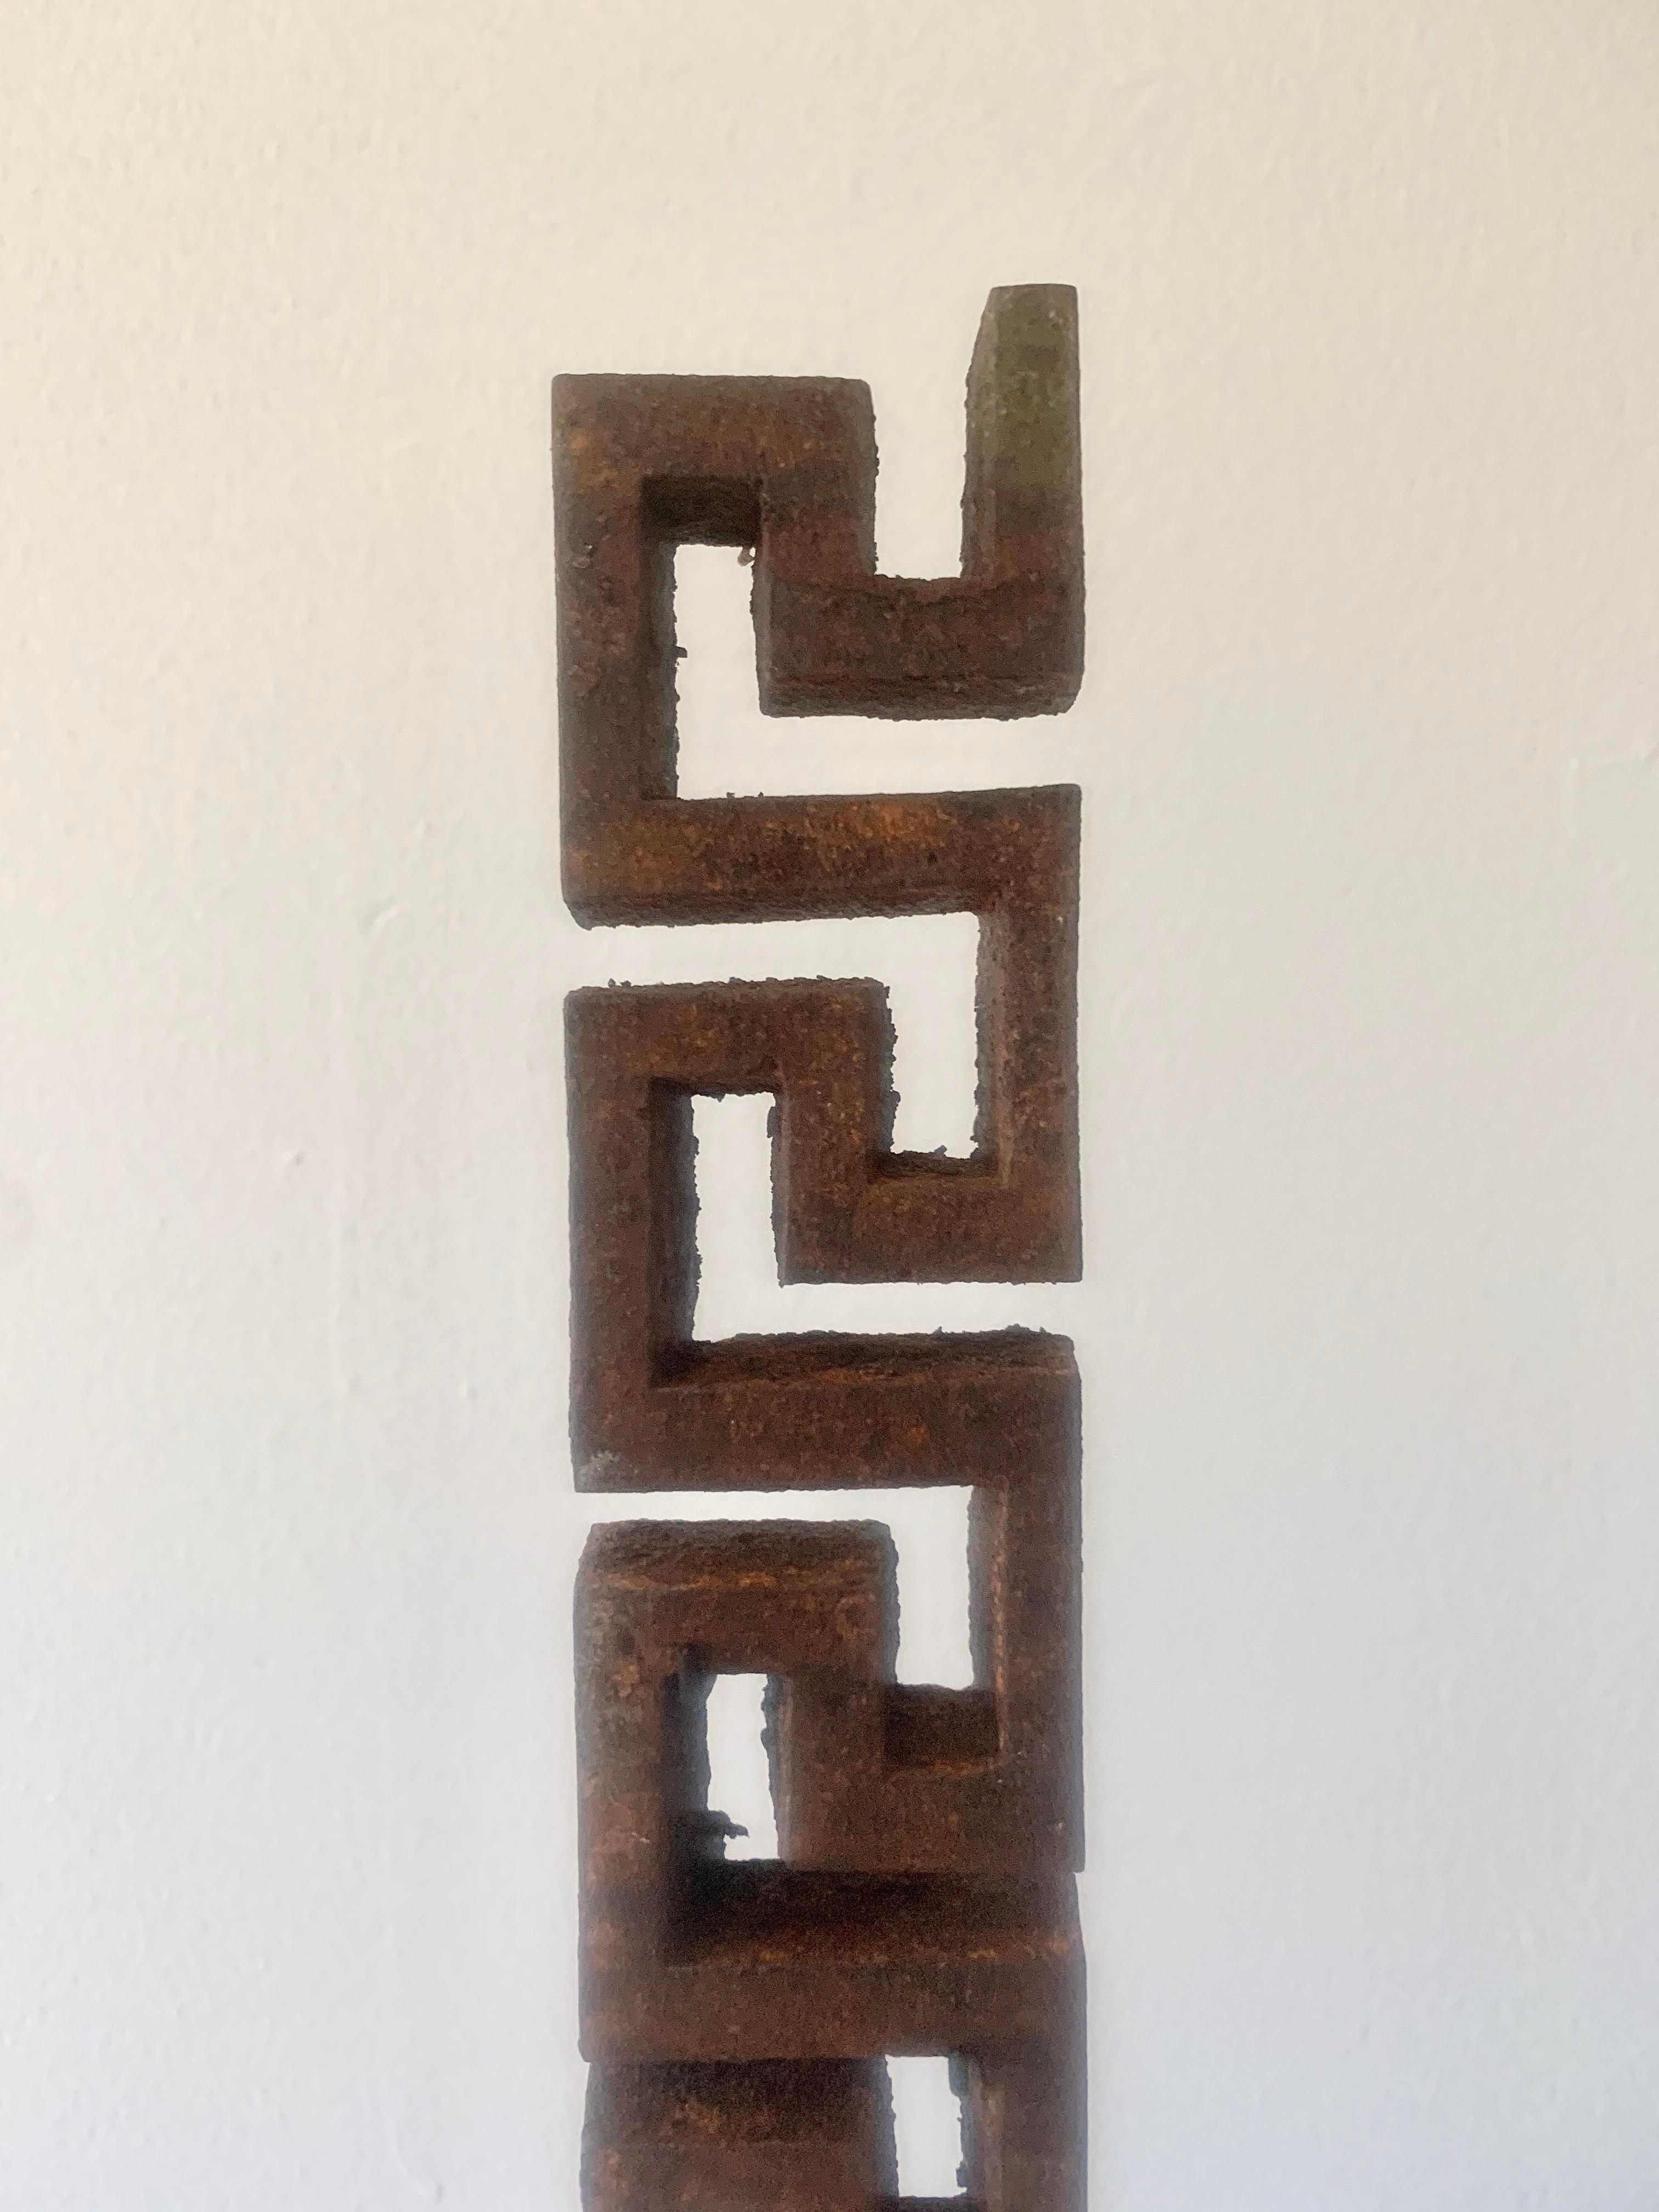 A set of 3 early 20th century iron Greek key architectural fragments on custom black steel mounts. Each fragment measures 2ʺW × 0.5ʺD × 14ʺH while the mounts are 3 different sizes which allow the fragments to be adjusted.
